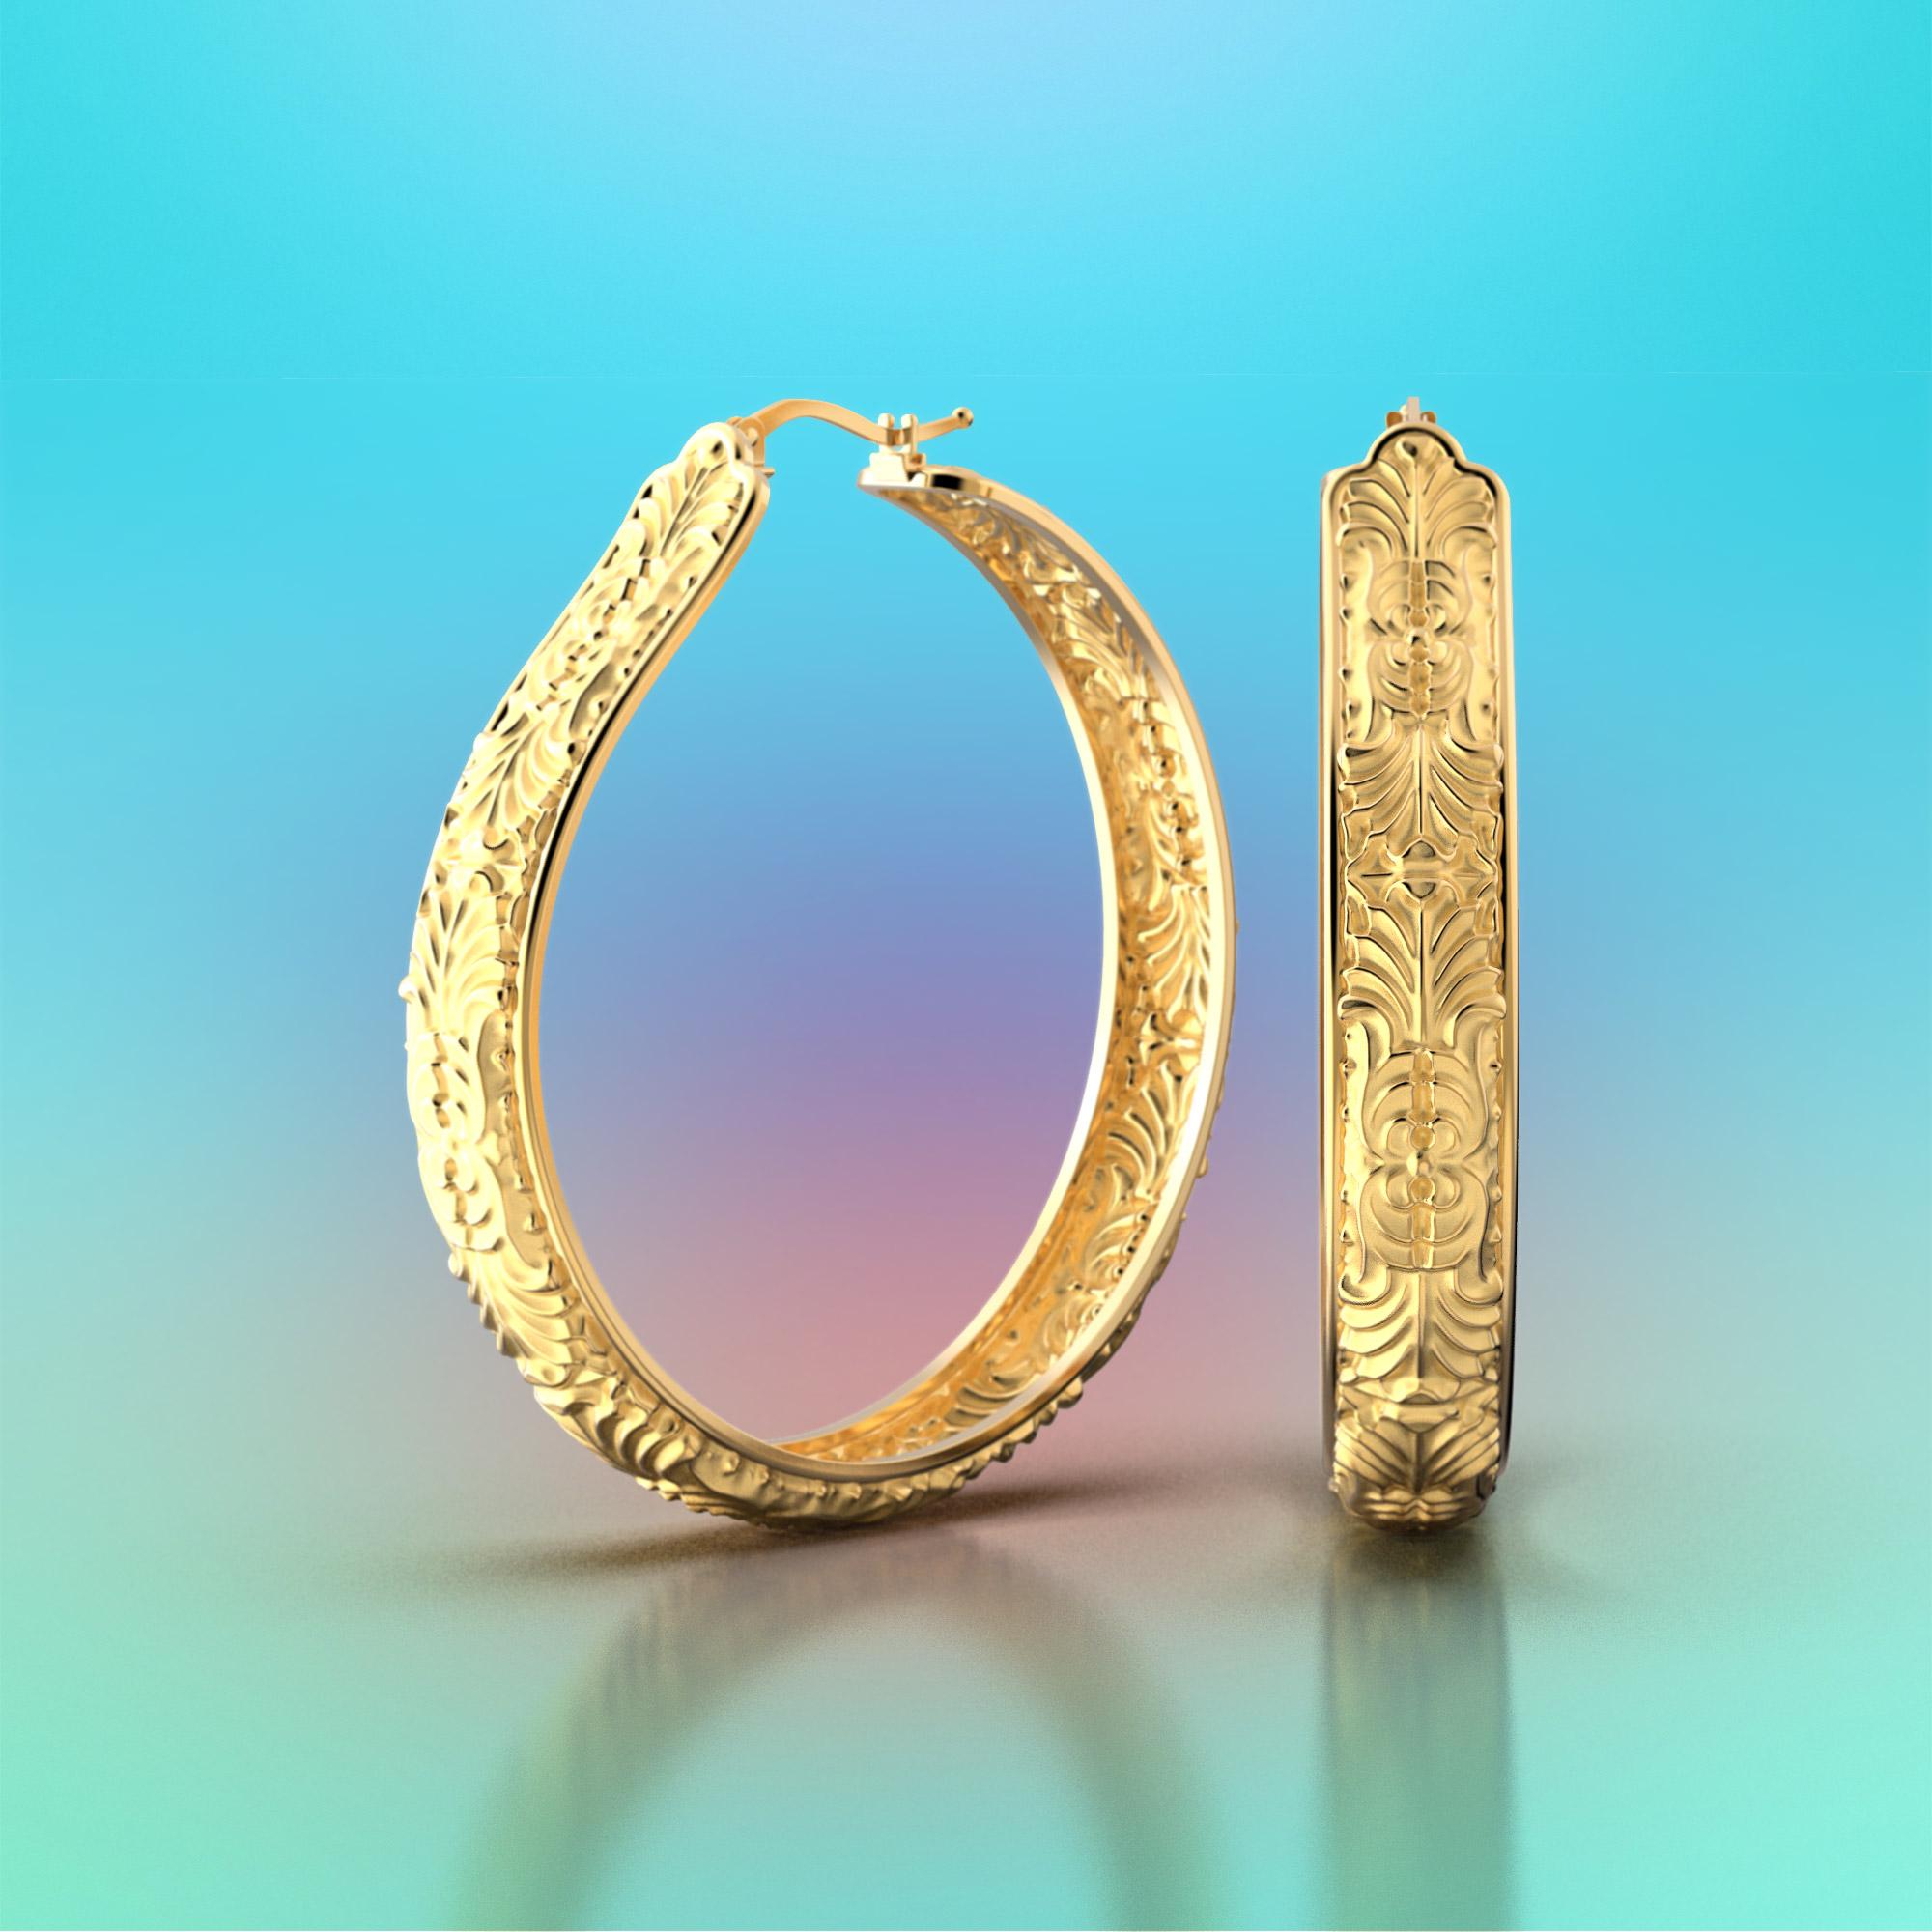 Women's  Extra Large Stunning hoop earrings in 14k Gold Made in Italy, made to order. For Sale